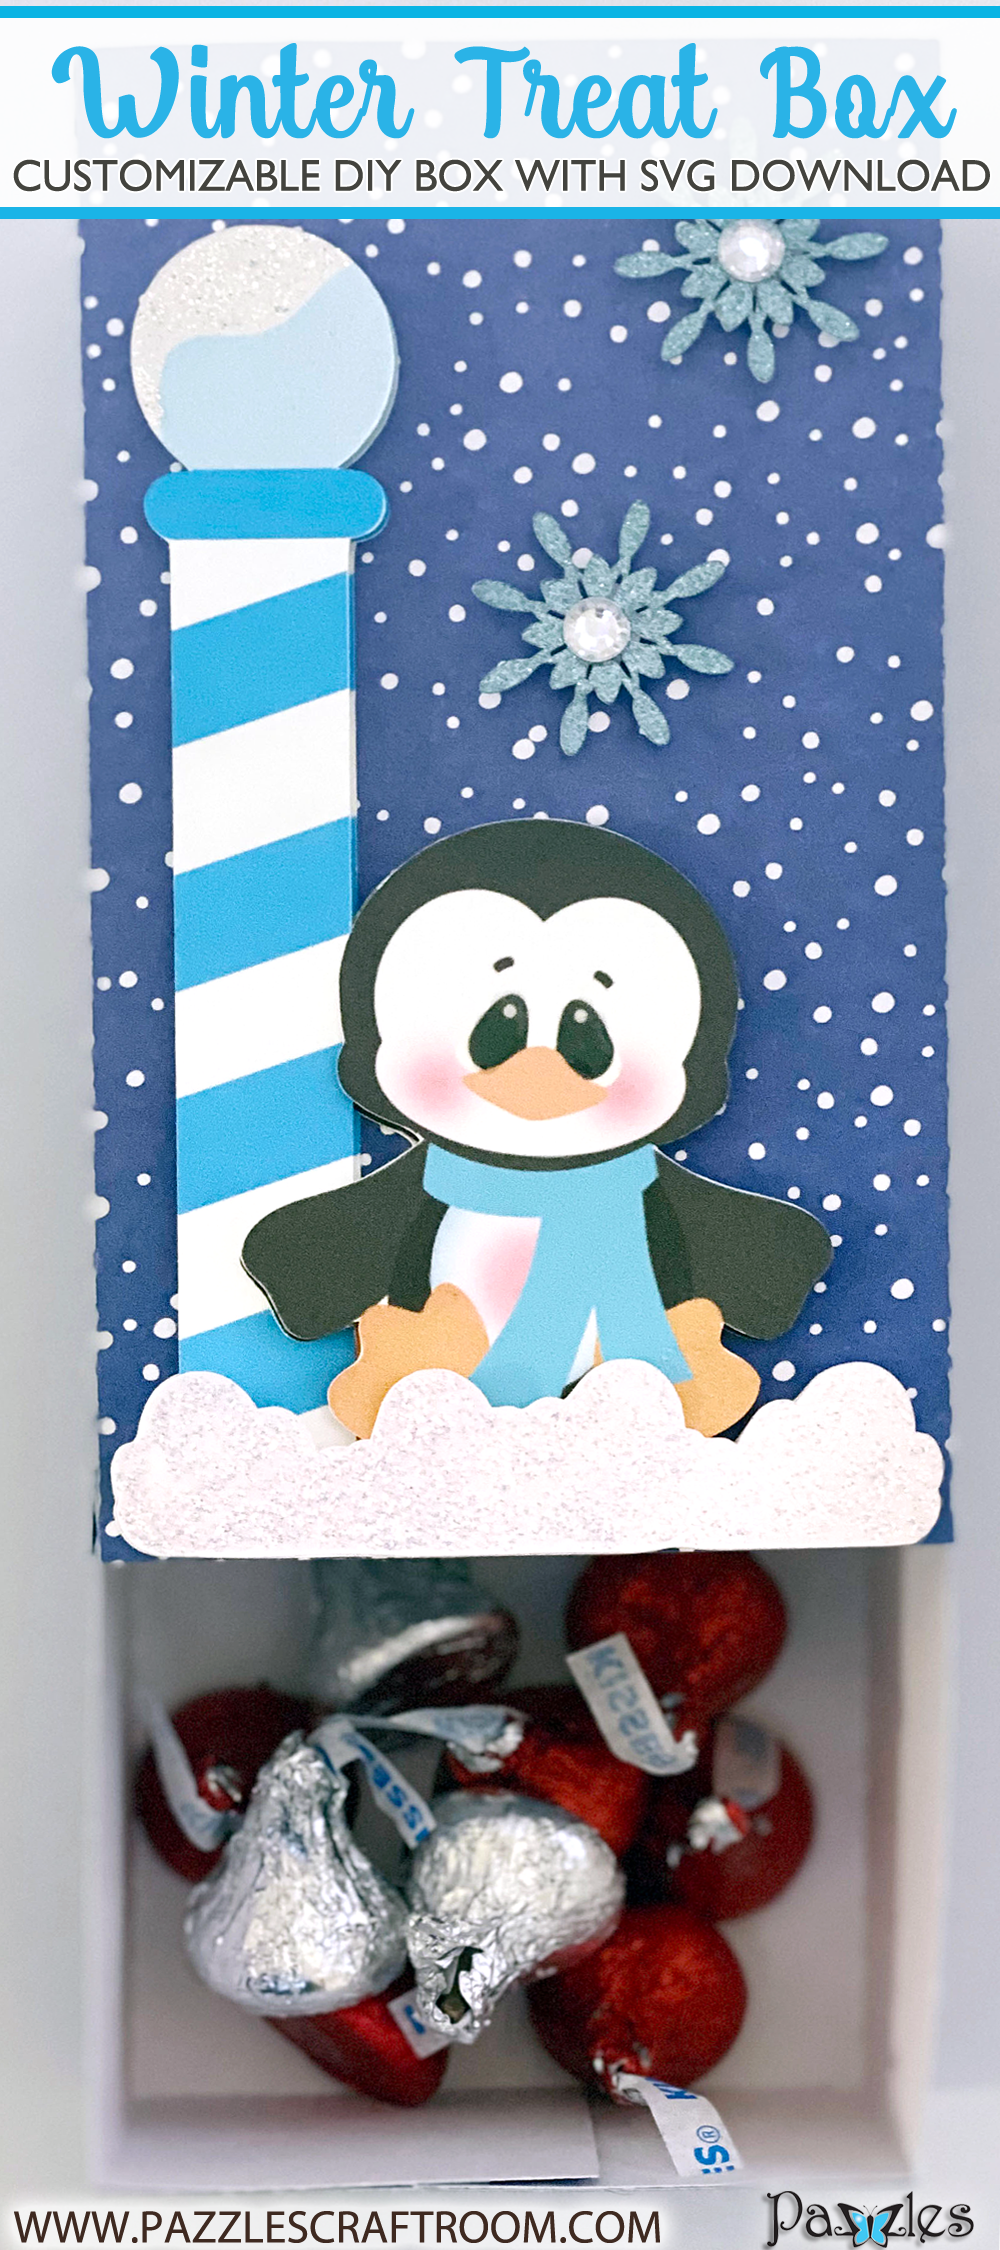 Pazzles DIY Winter Treat Box with instant SVG download. Compatible with all major electronic cutters including Pazzles Inspiration, Cricut, and Silhouette Cameo. Design by Lisa Reyna.